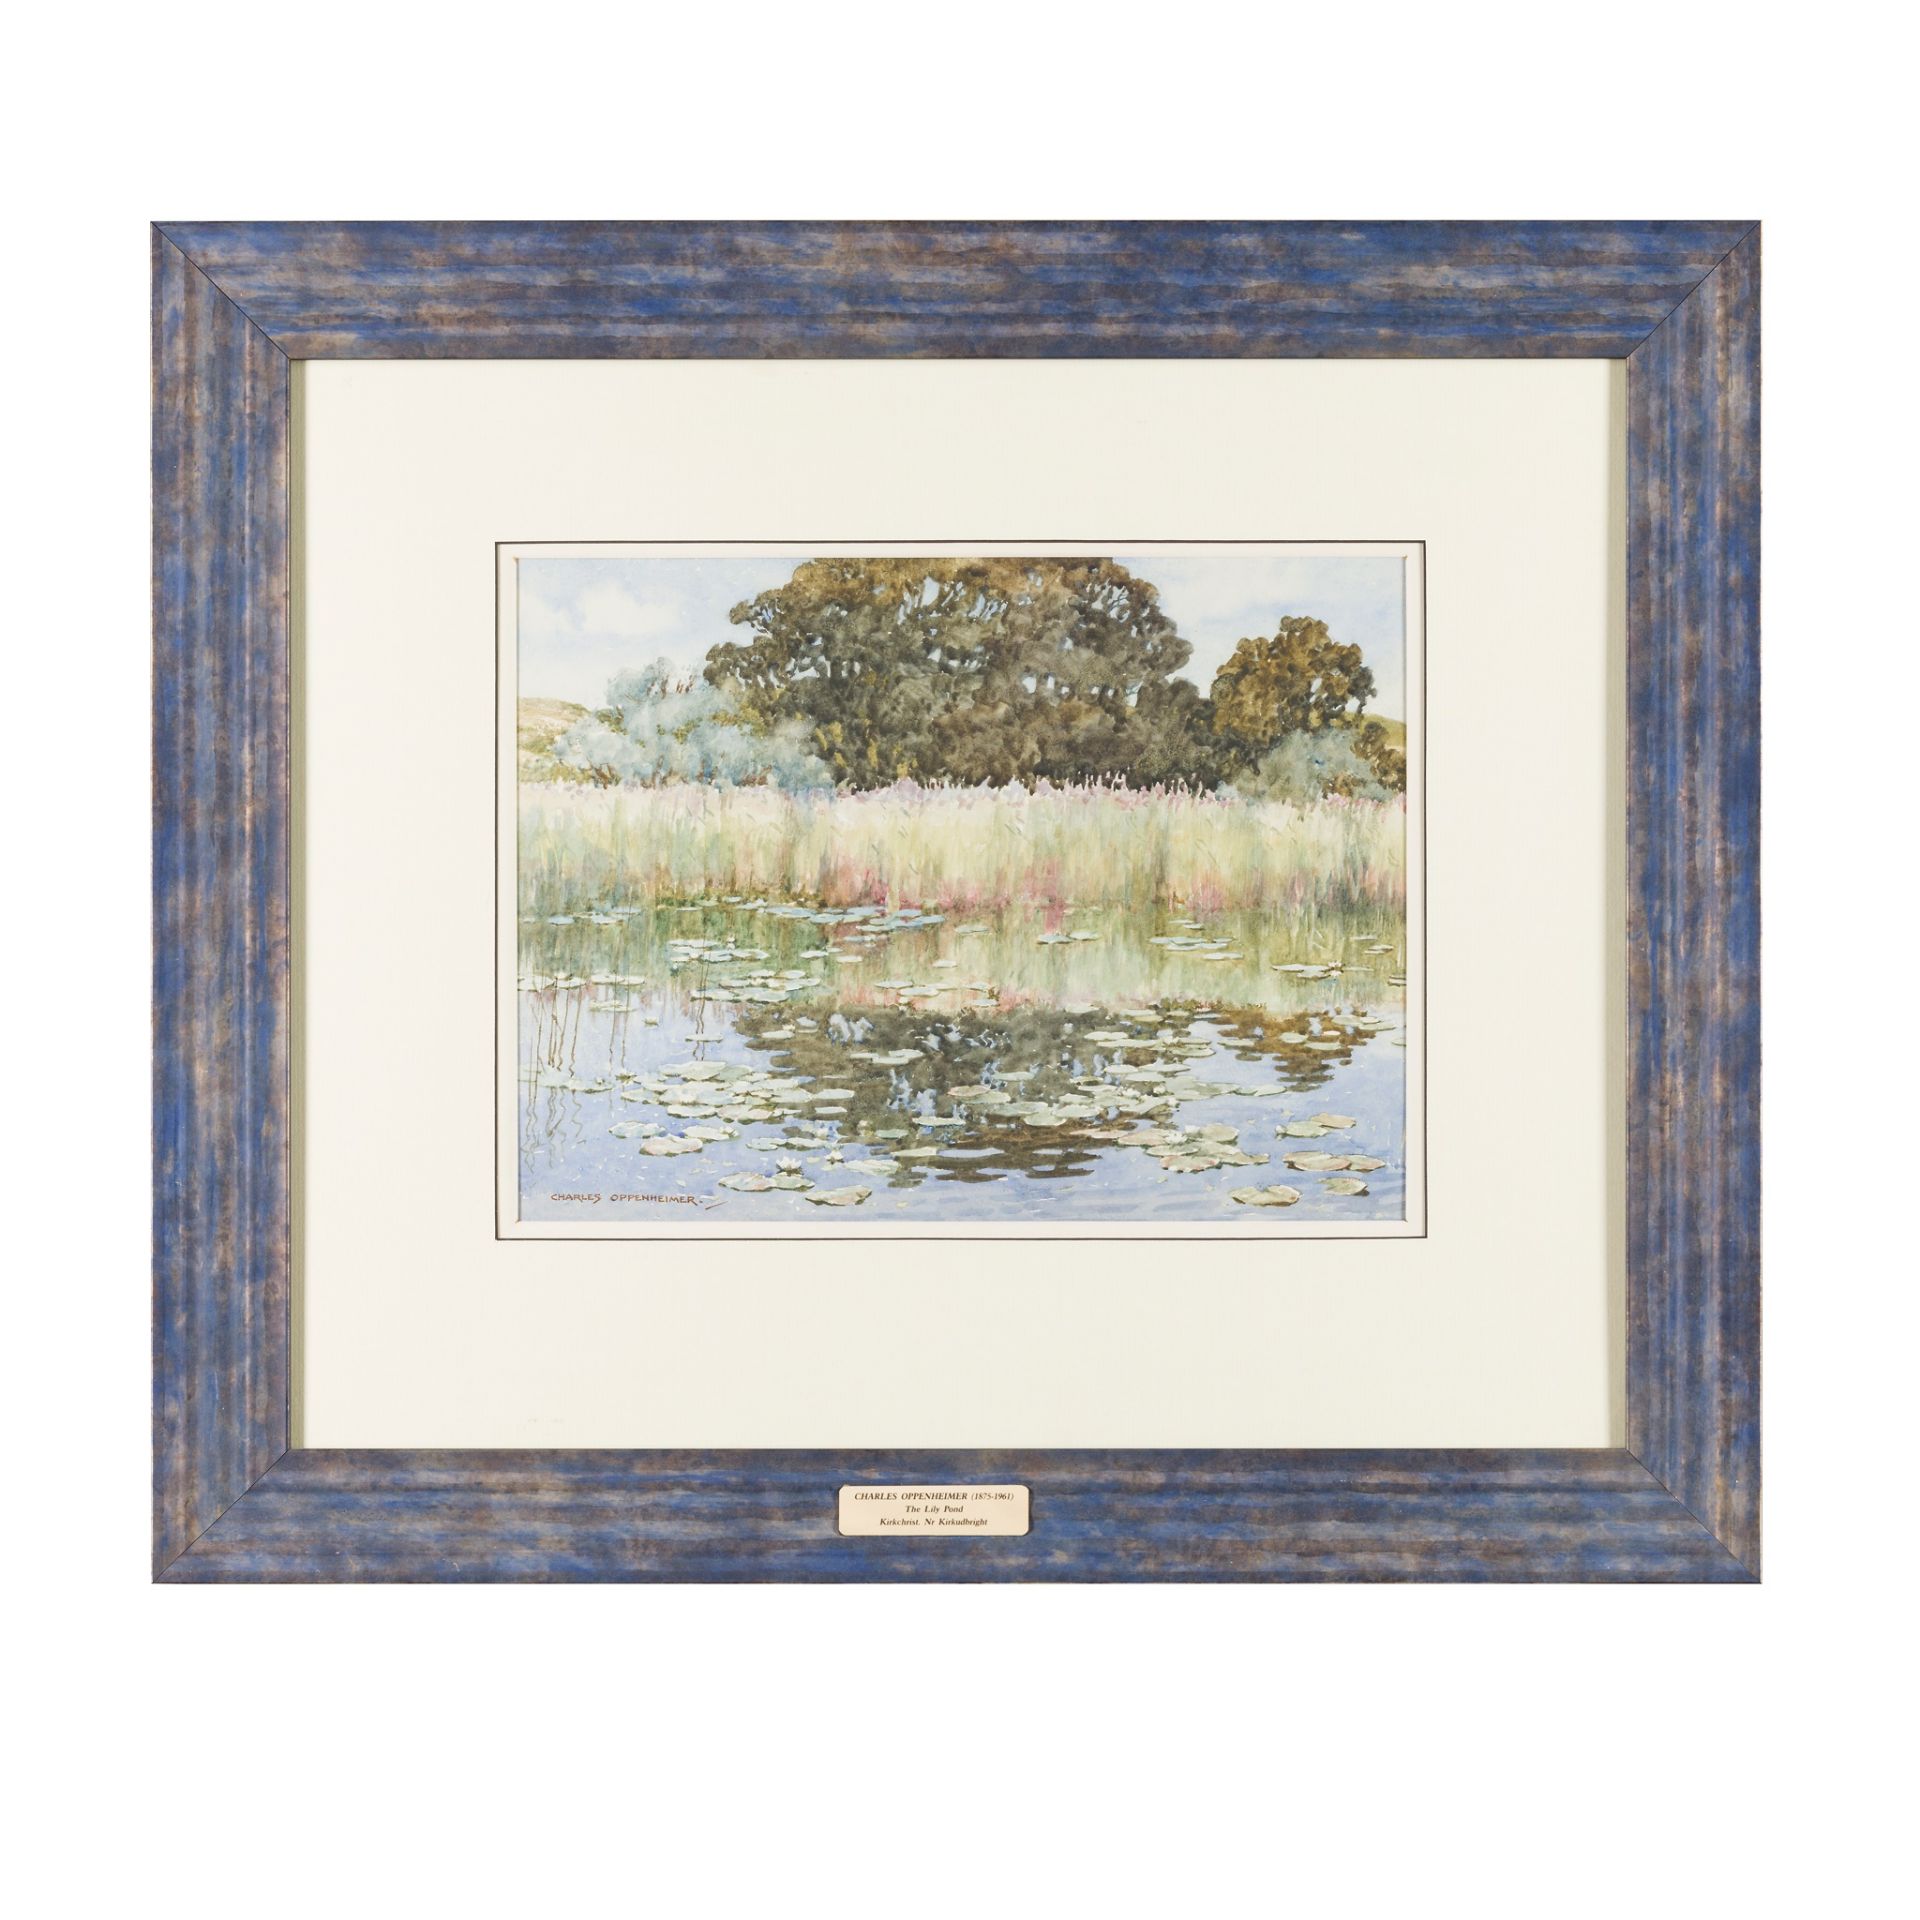 § CHARLES OPPENHEIMER R.S.A., R.S.W (SCOTTISH 1876-1961) THE LILY POND - Image 2 of 3